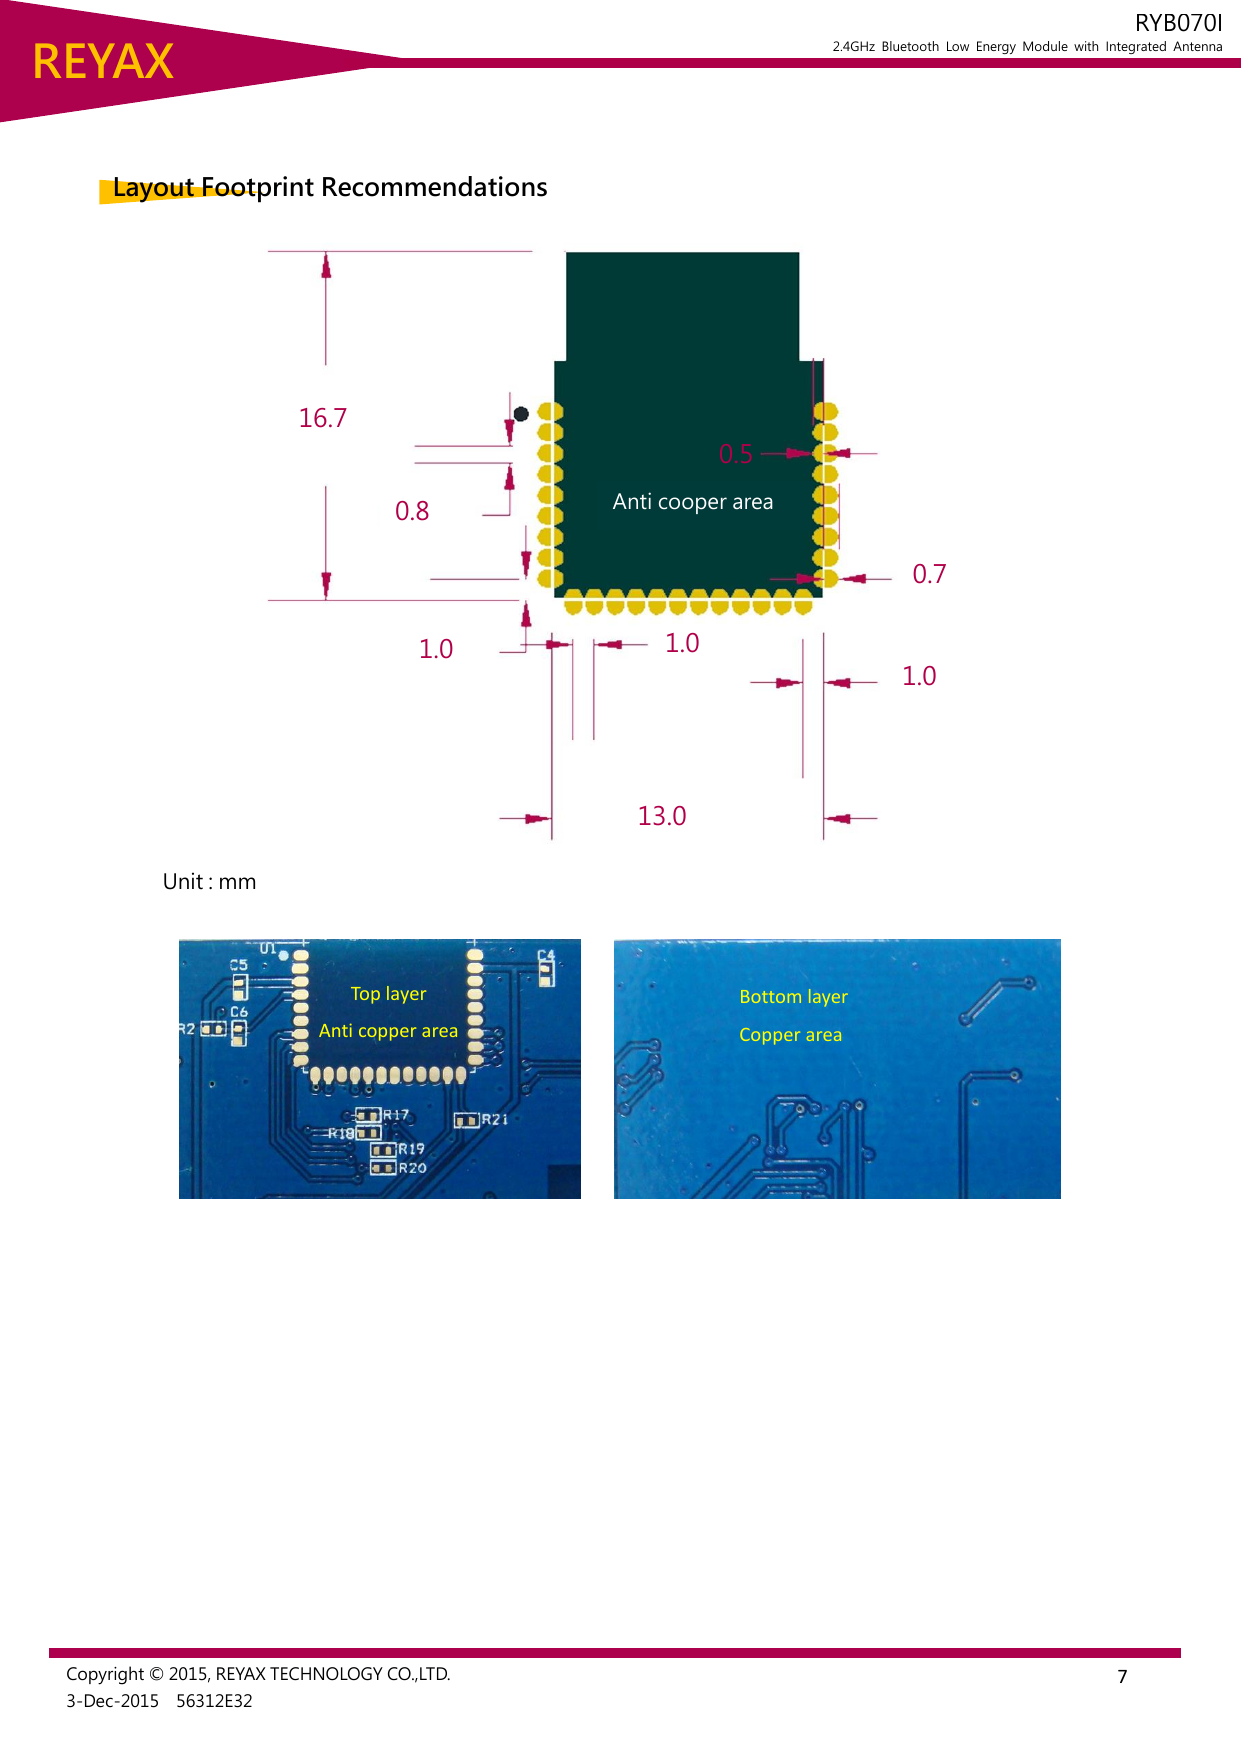  7 REYAX RYB070I 2.4GHz  Bluetooth  Low  Energy  Module  with  Integrated  Antenna  Copyright © 2015, REYAX TECHNOLOGY CO.,LTD. 3-Dec-2015    56312E32   Layout Footprint Recommendations  Unit : mm            Top layer Anti copper area Bottom layer Copper area 16.7 0.8 0.5 1.0 1.0 13.0 1.0 0.7 Anti cooper area 